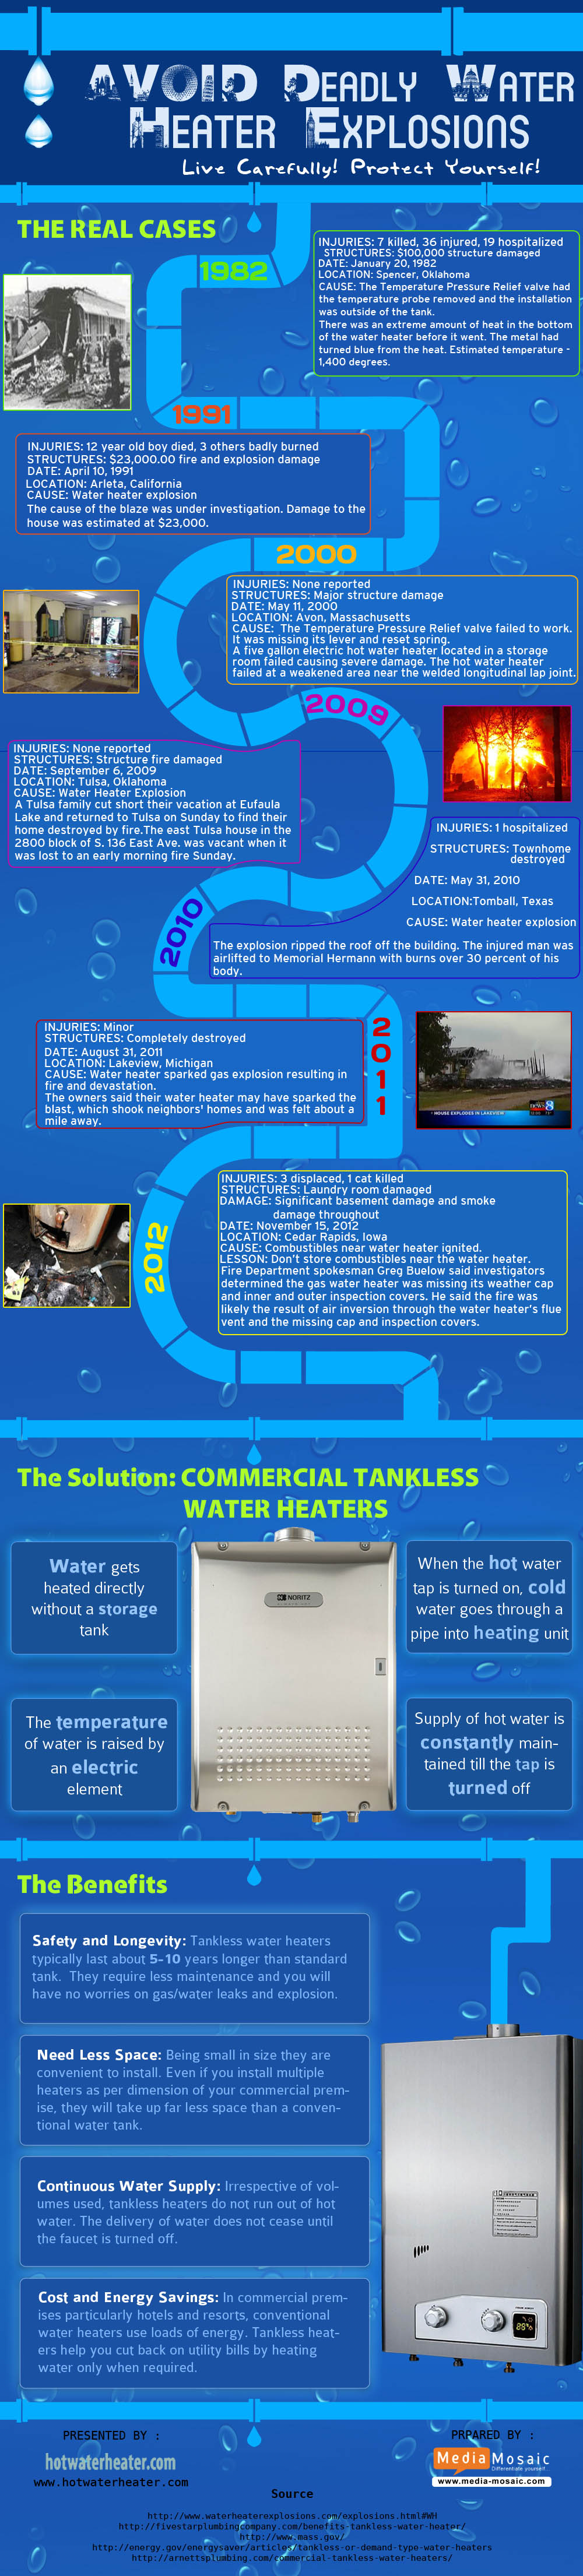 Avoid Deadly Water Heater Explosions